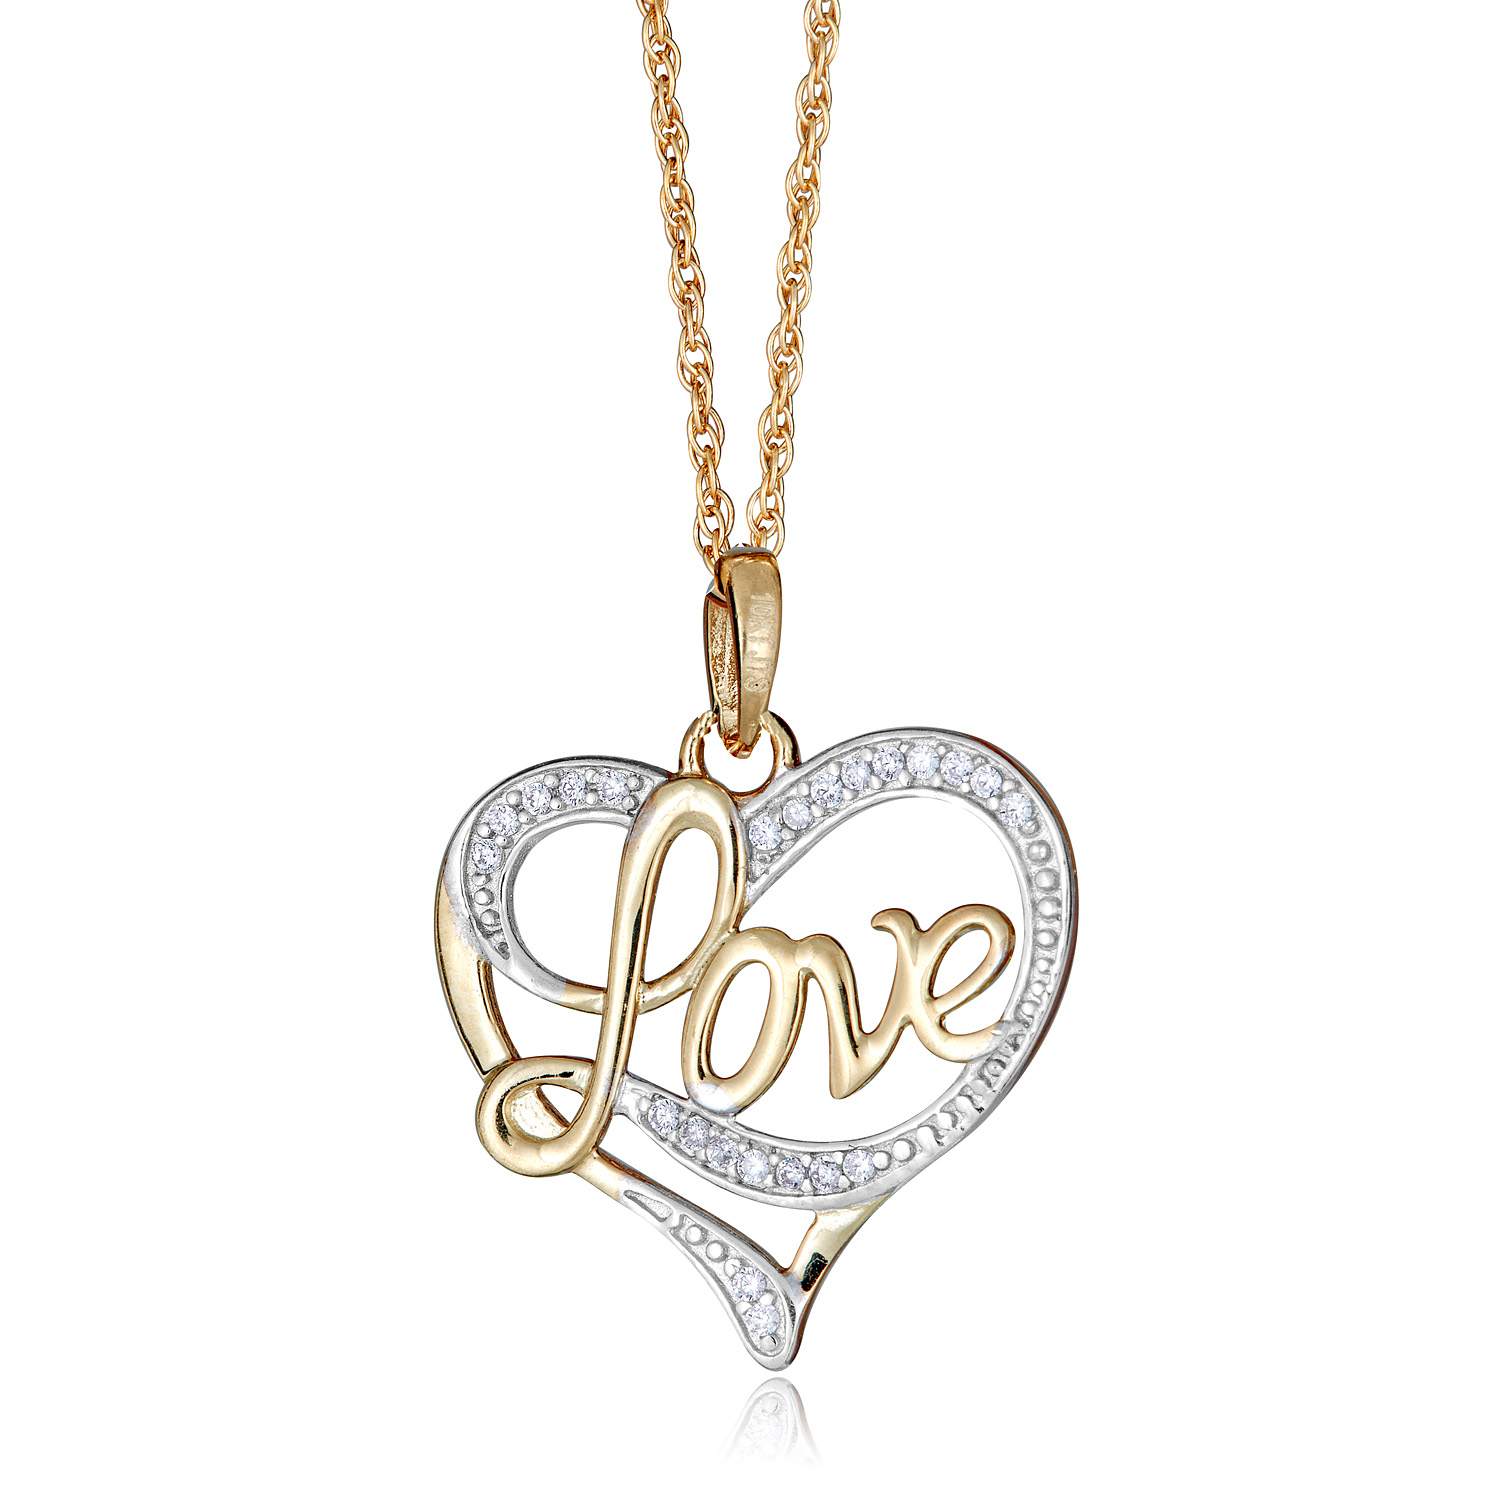 Avora 10K Gold Two-Tone Simulated Diamond CZ "Love" Open Heart Pendant Necklace with 18" Chain